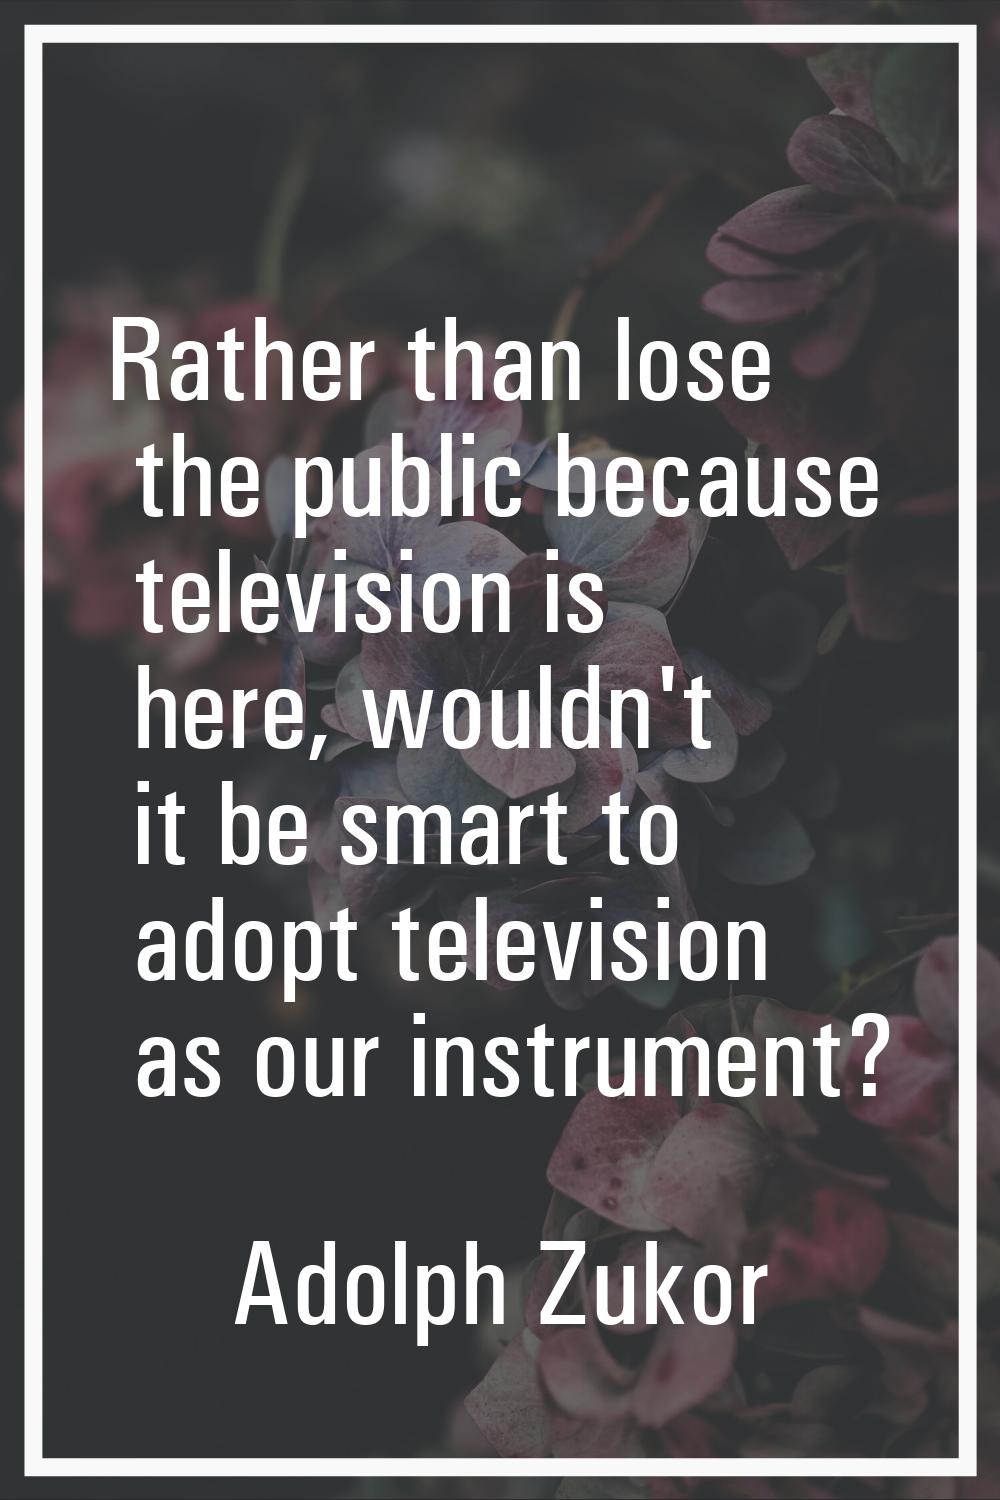 Rather than lose the public because television is here, wouldn't it be smart to adopt television as